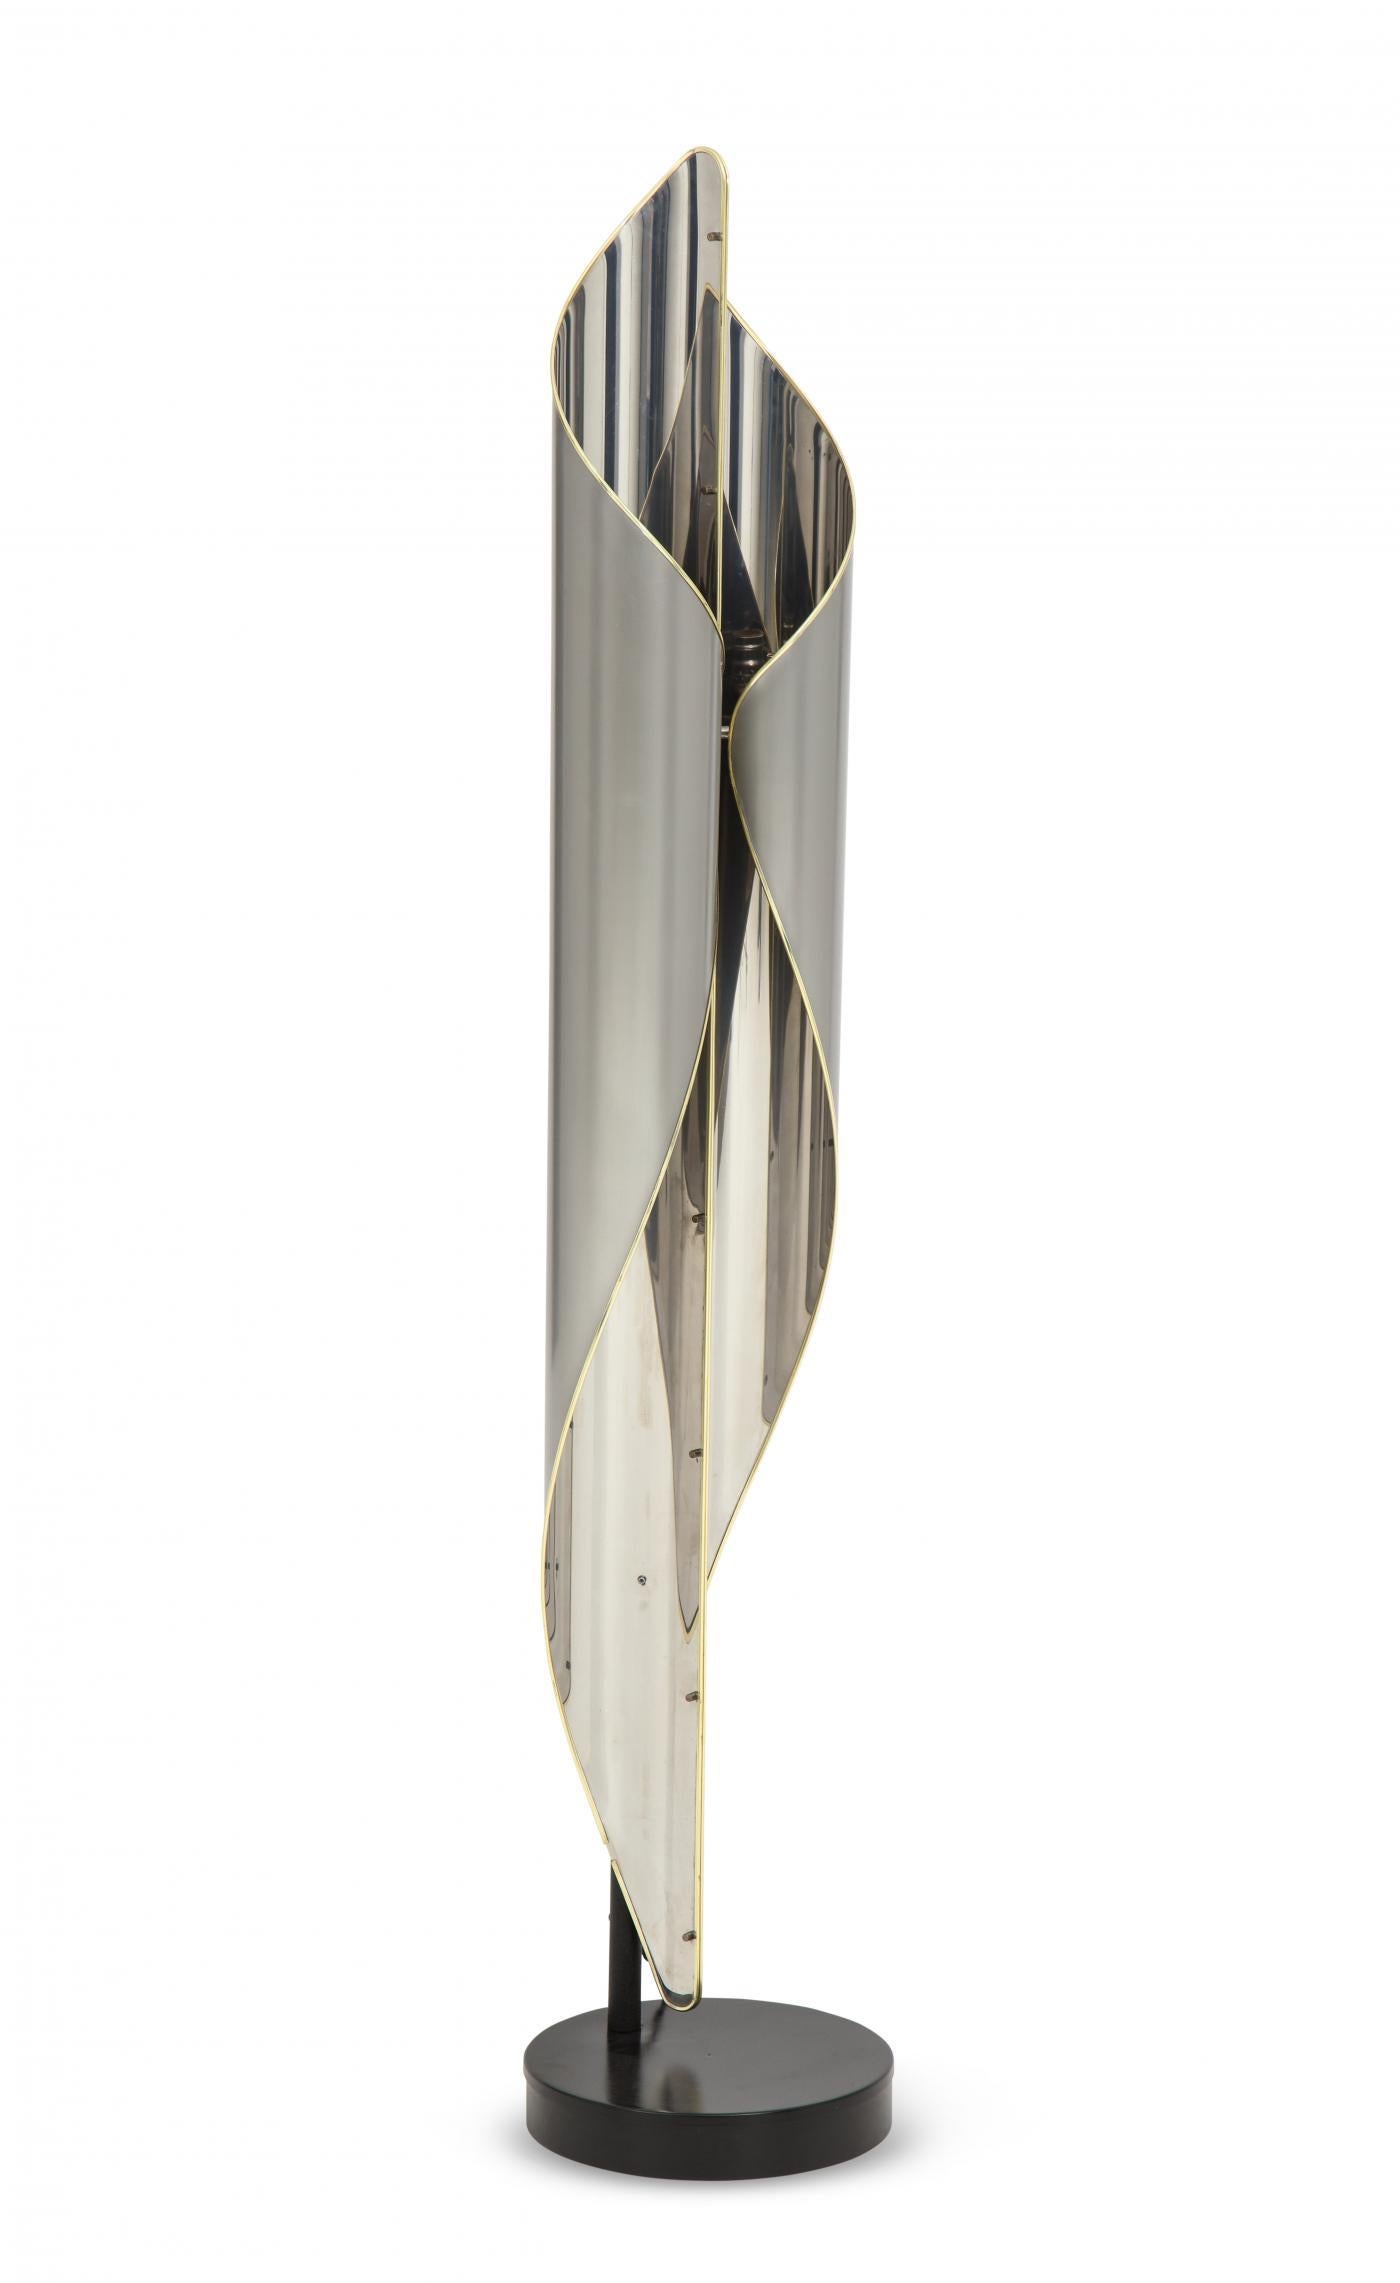 Late 20th Century Italian Floor Lamp in Chrome and Steel, Circa 1970s For Sale